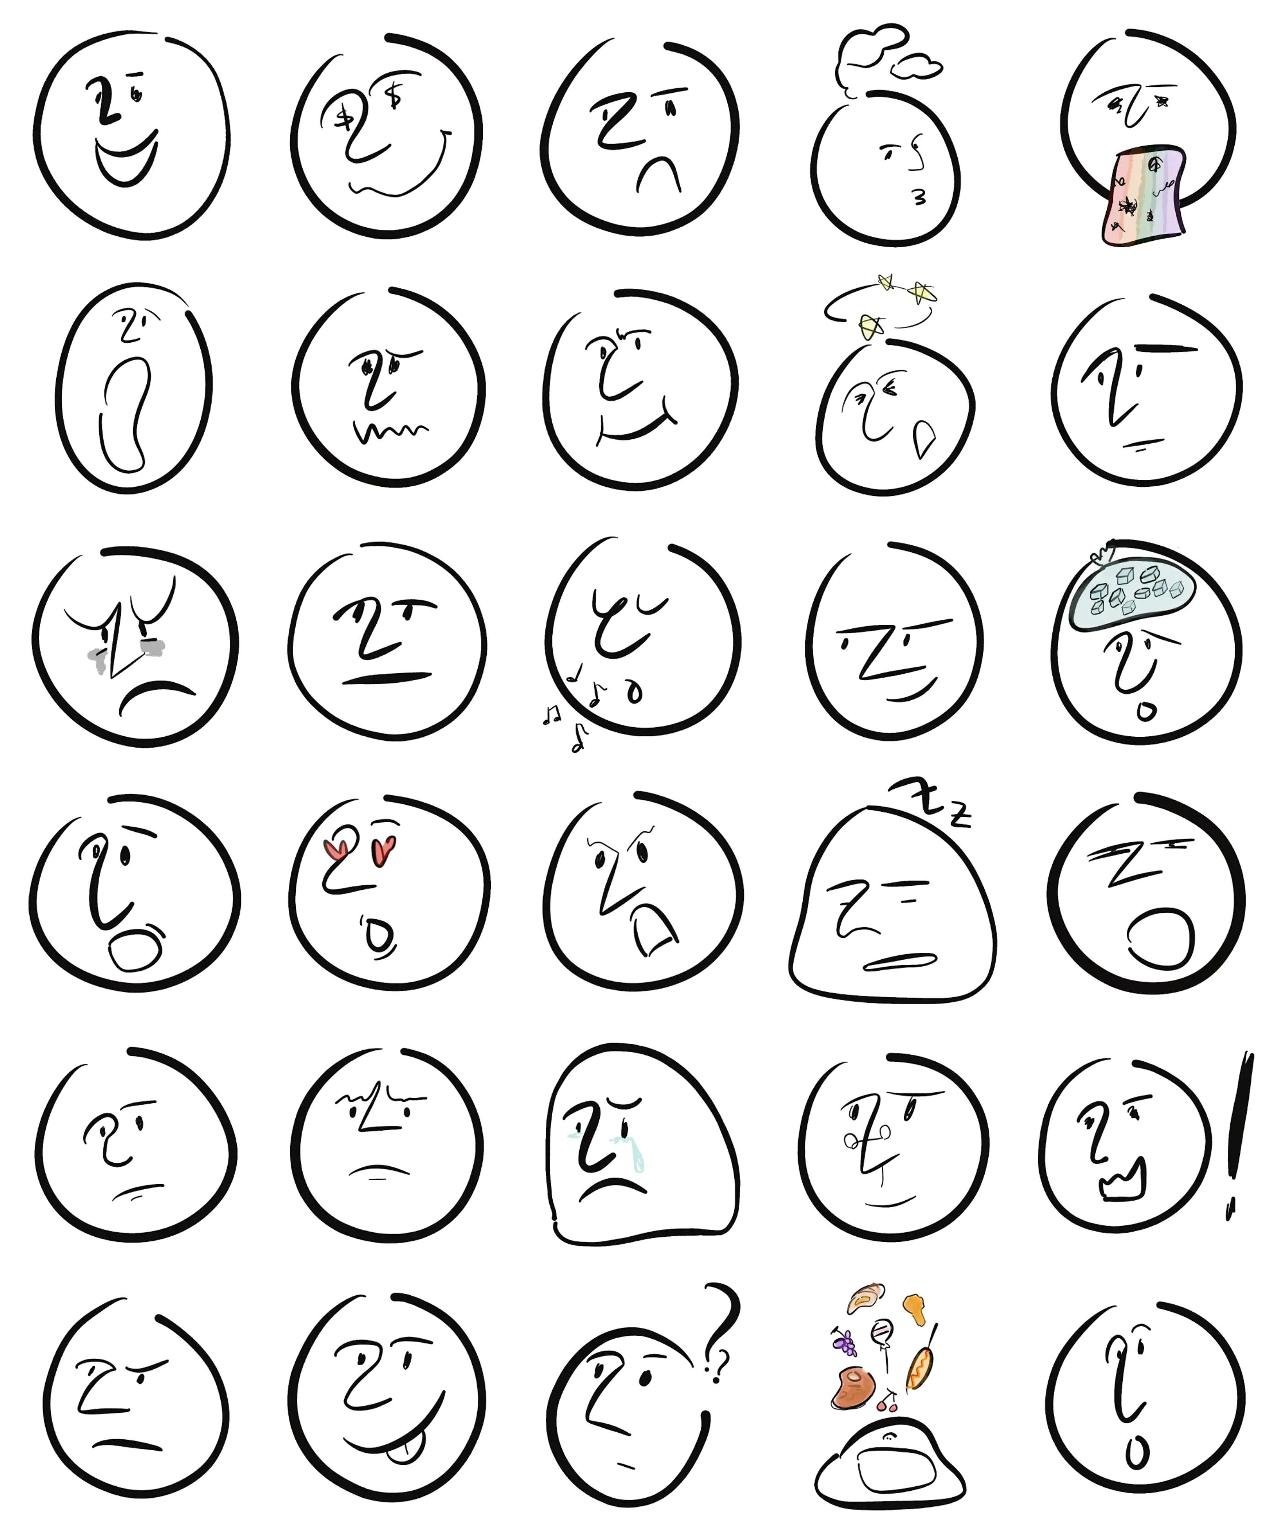 Emotional Ball Animation/Cartoon,Etc. sticker pack for Whatsapp, Telegram, Signal, and others chatting and message apps